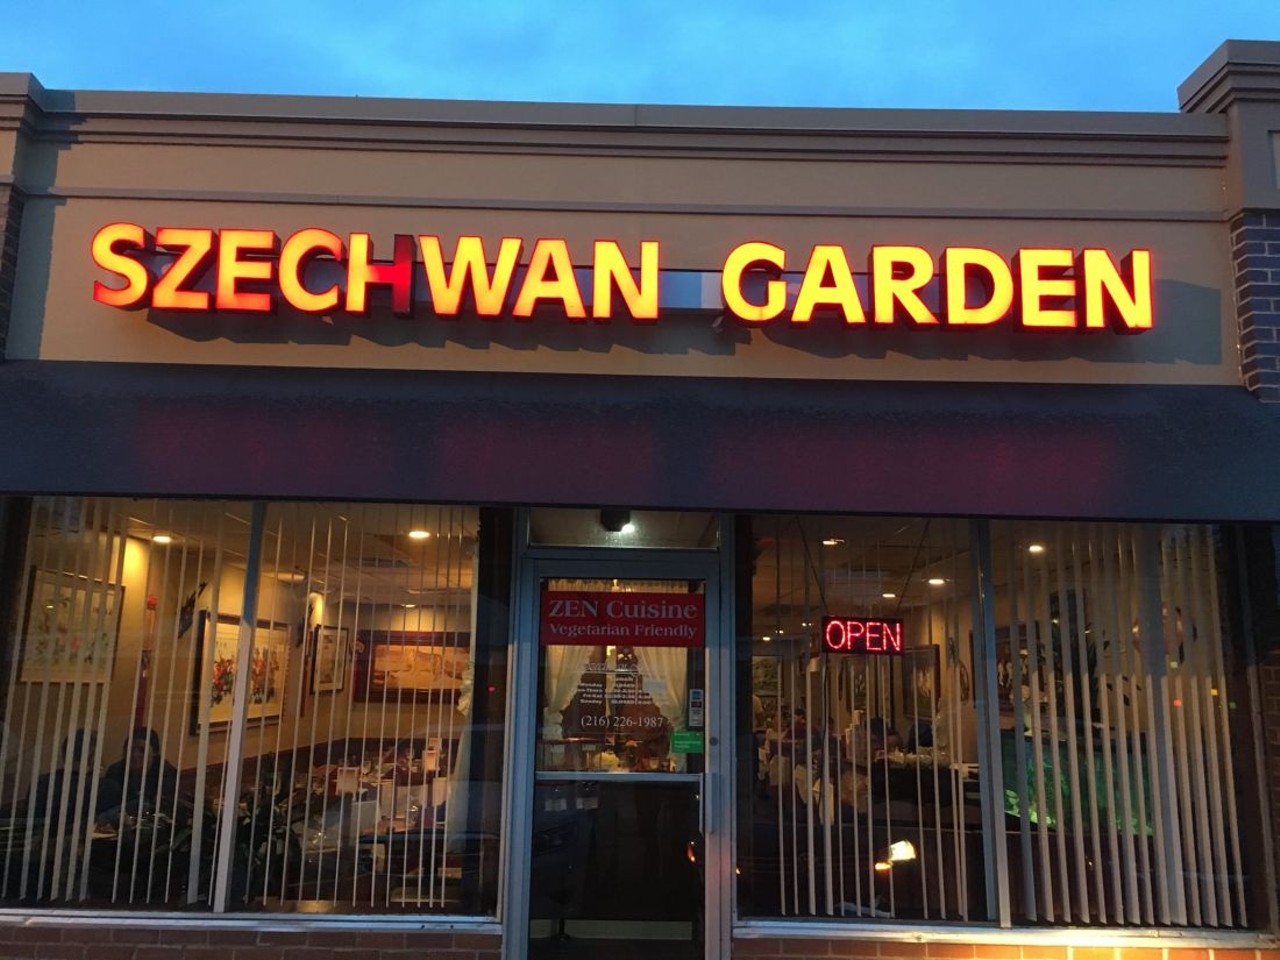  Szechwan Garden
13800 Detroit Ave., Lakewood
In addition to all of the Chinese dishes we expect on a familiar menu, this Lakewood joint also has a &#145;Zen Menu&#146; featuring all sorts of vegan and vegetarian dishes for those looking for their Chinese fix but aren&#146;t ino eating animals.
Photo via Scene Archives